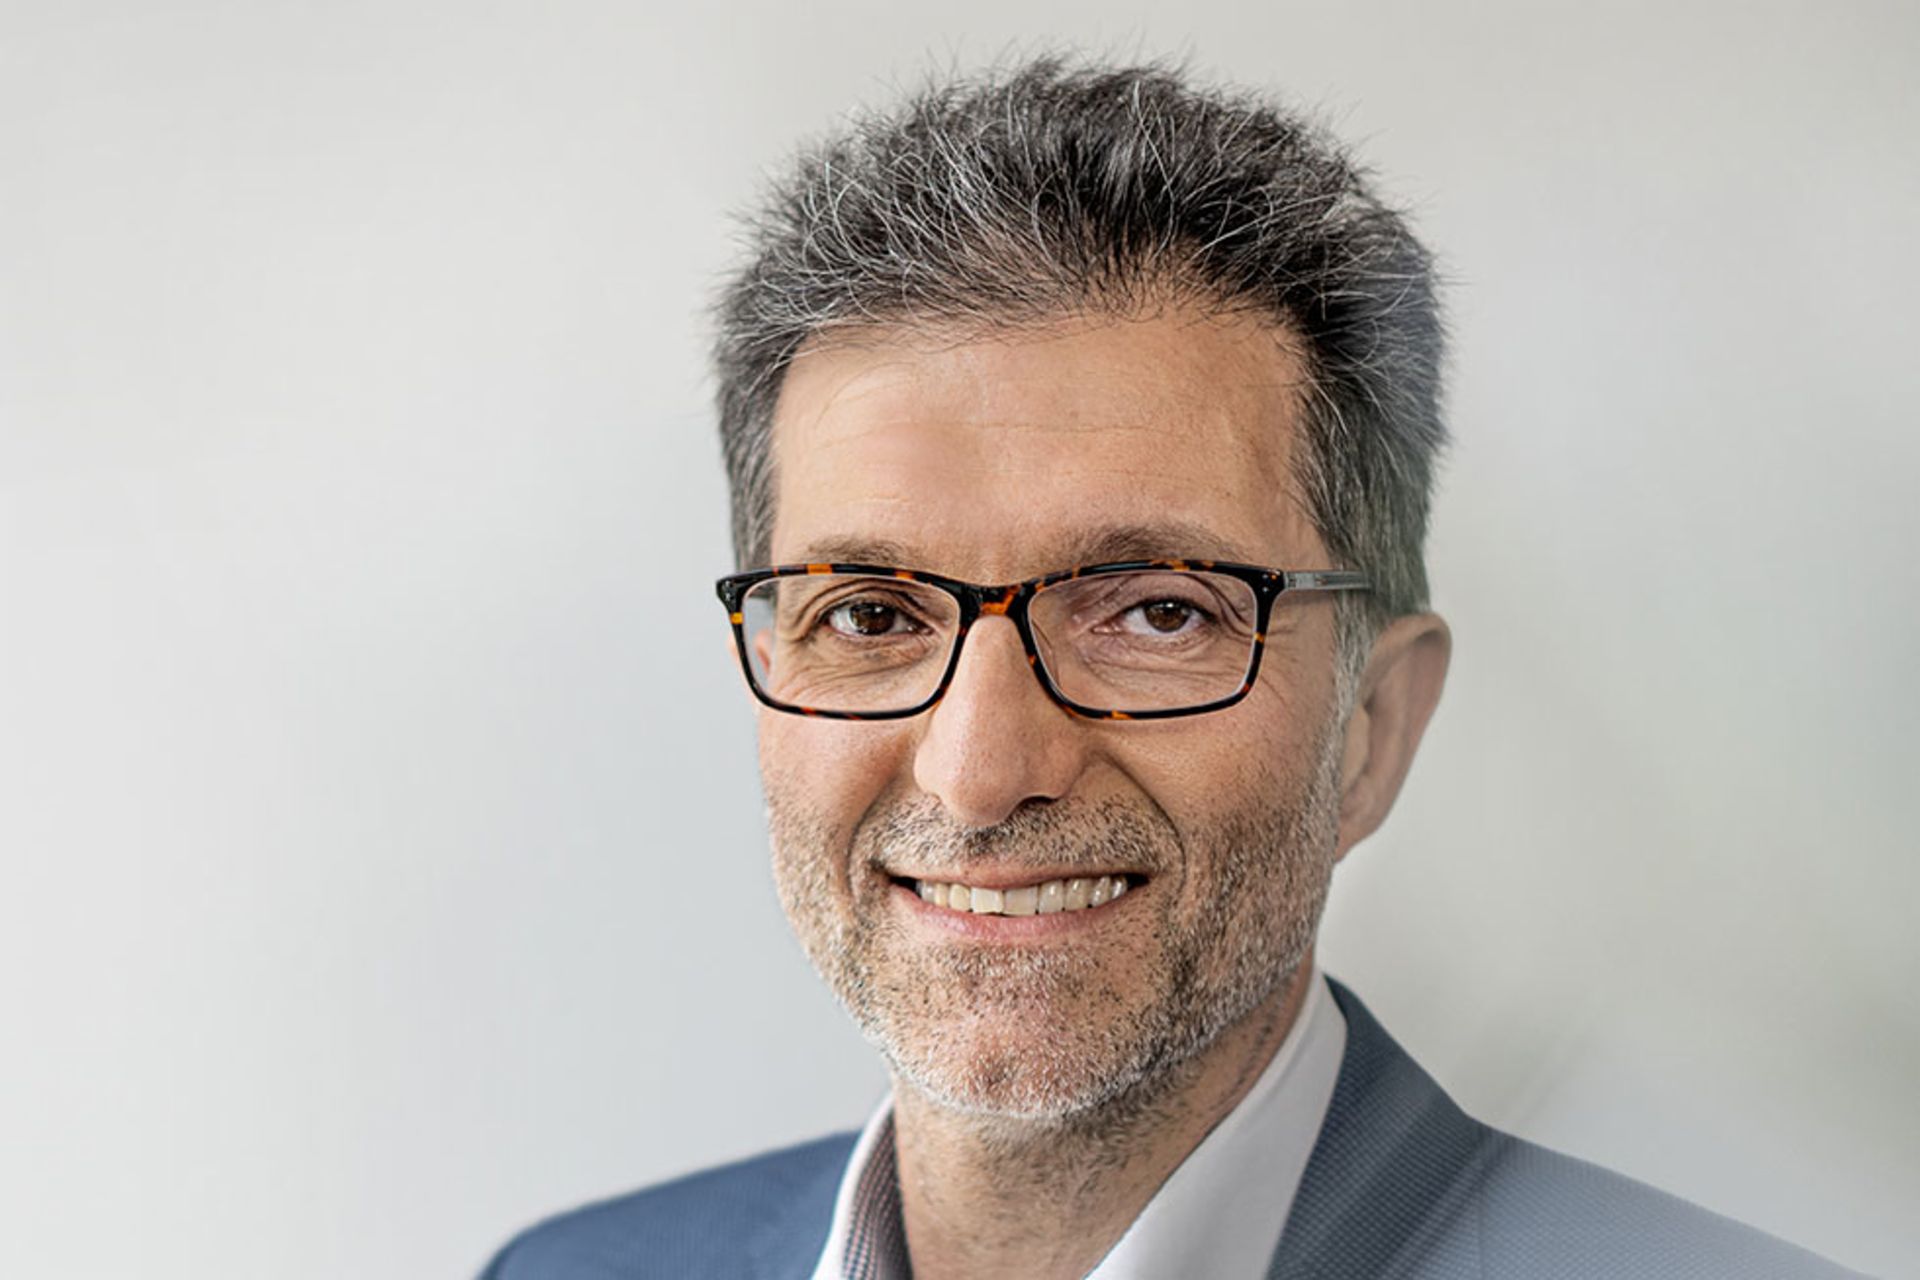 Contact, Pietro Zollino, Head of Group Communications, Governmental Relations & Sustainability